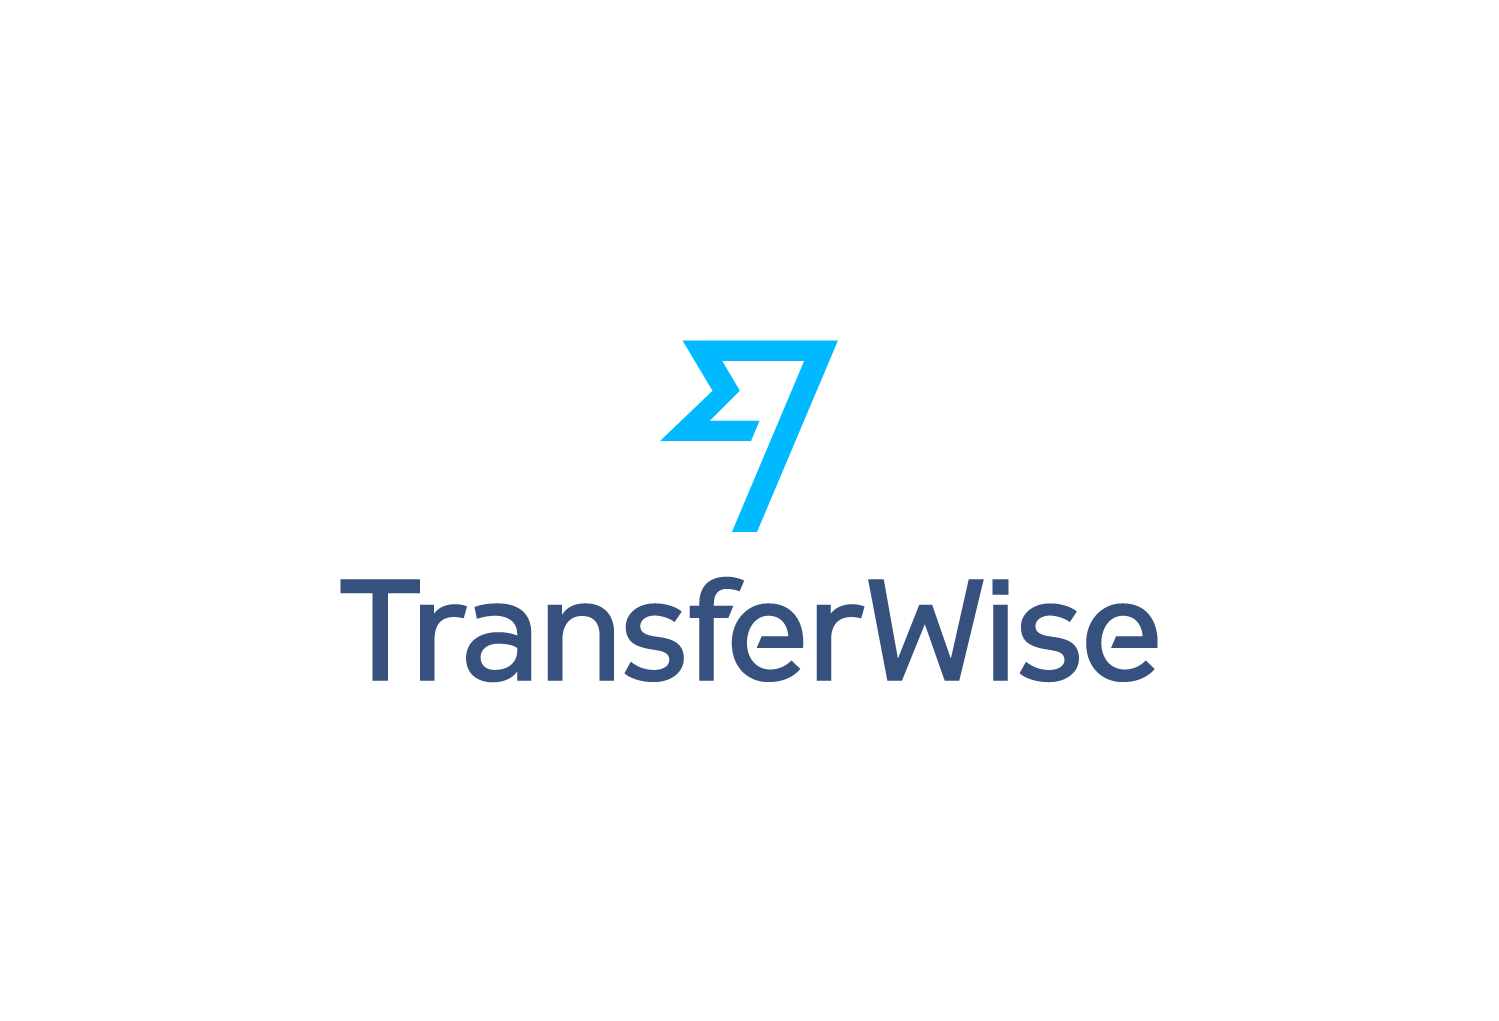 Transfer wise